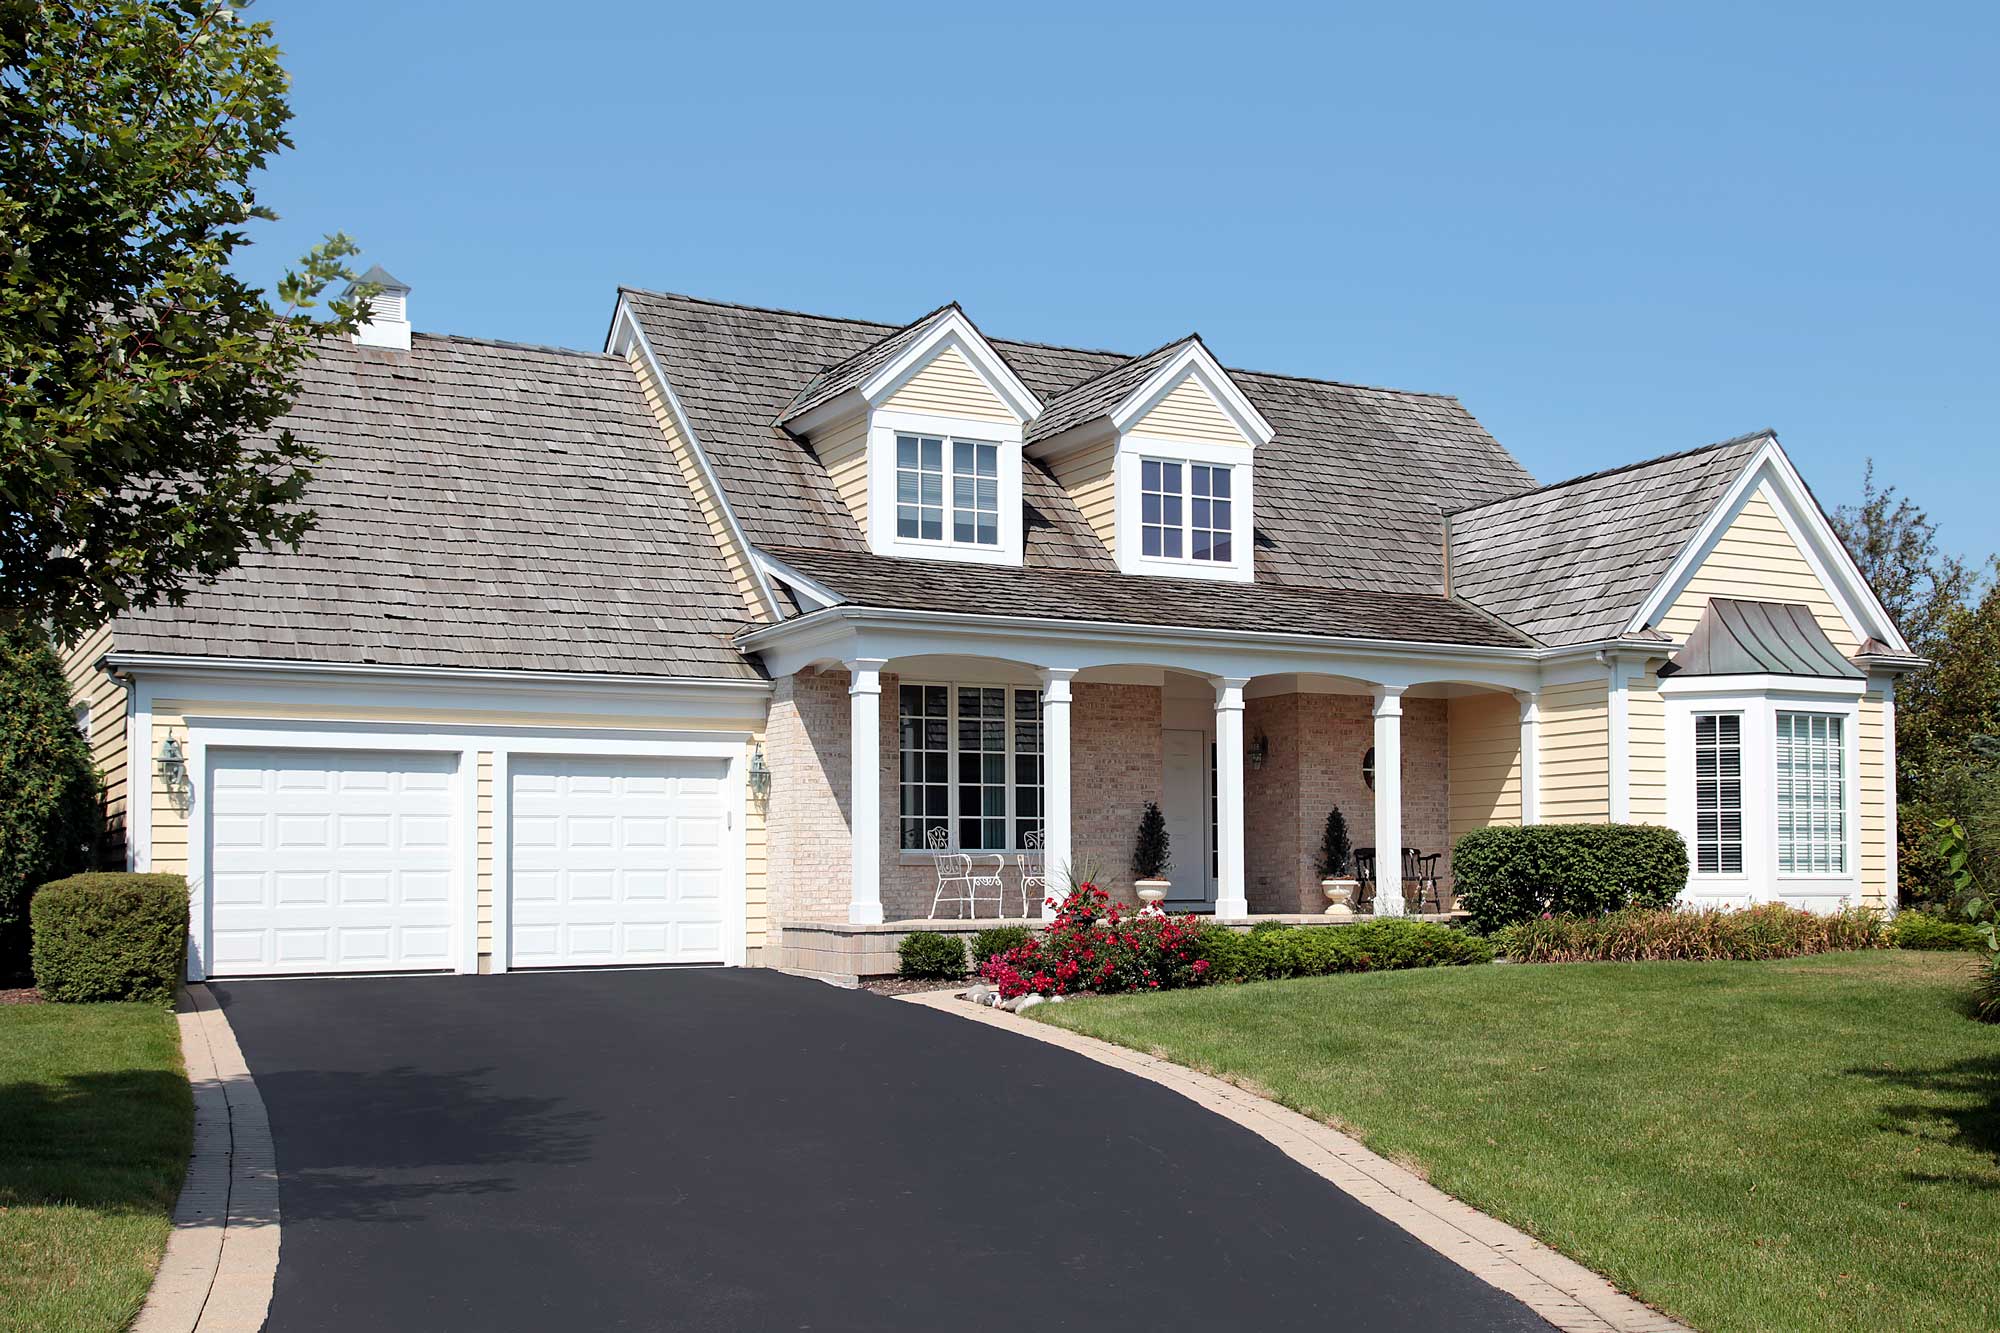 popular roof colors, best roof colors, roof trends this year